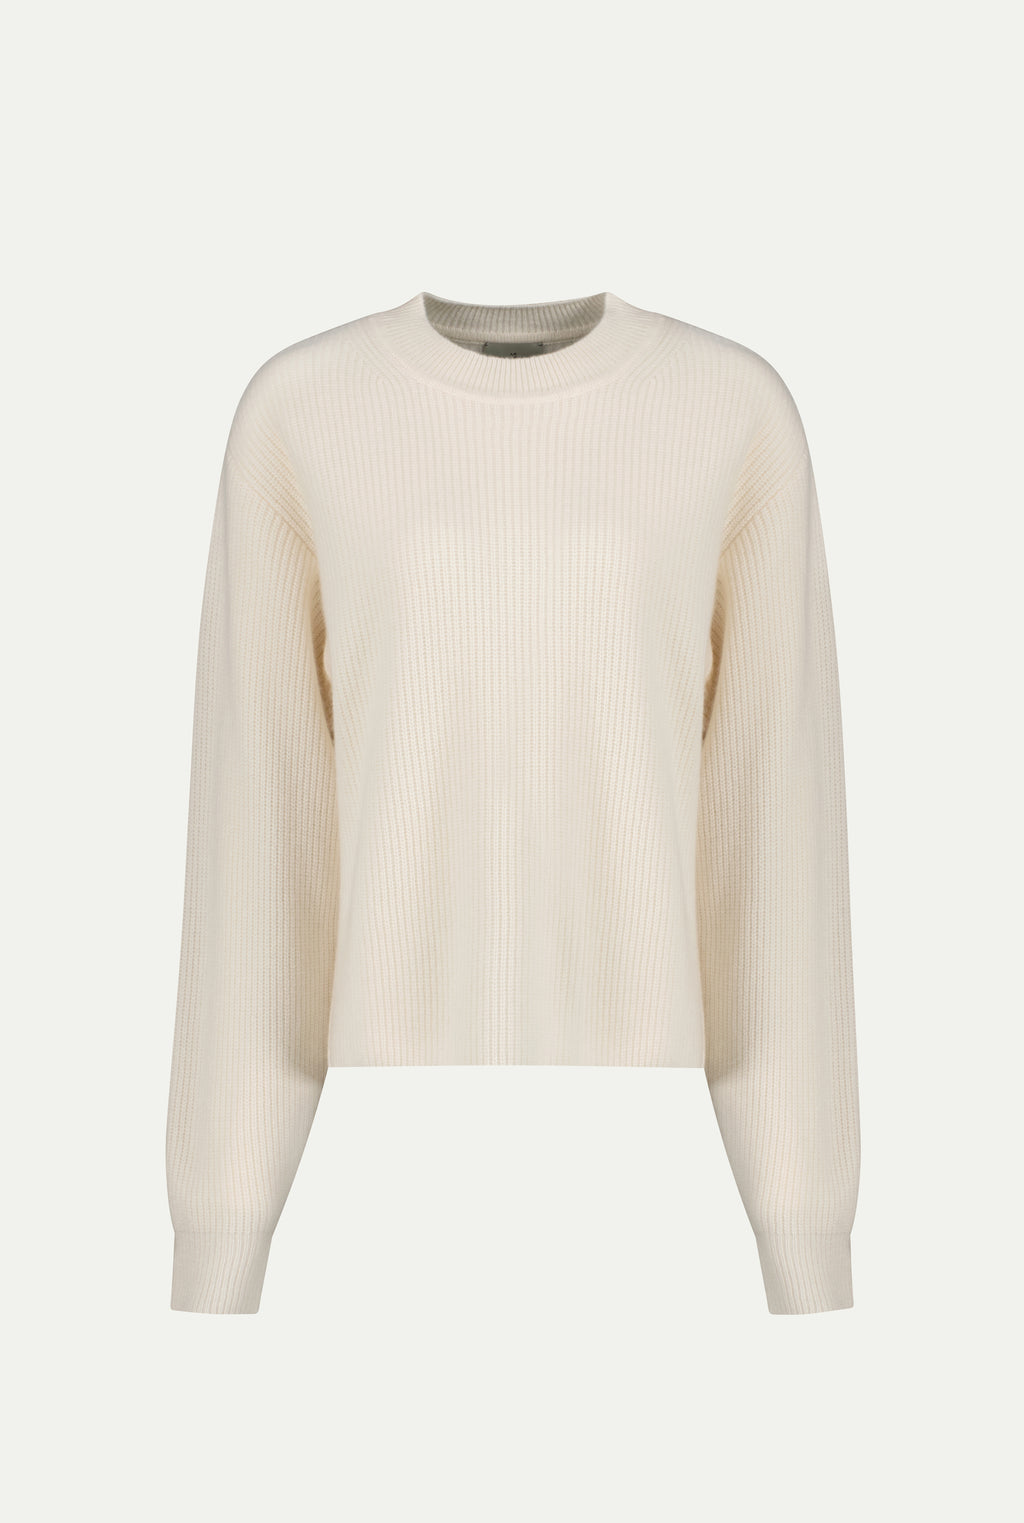 SOCOTRA cashmere sweater